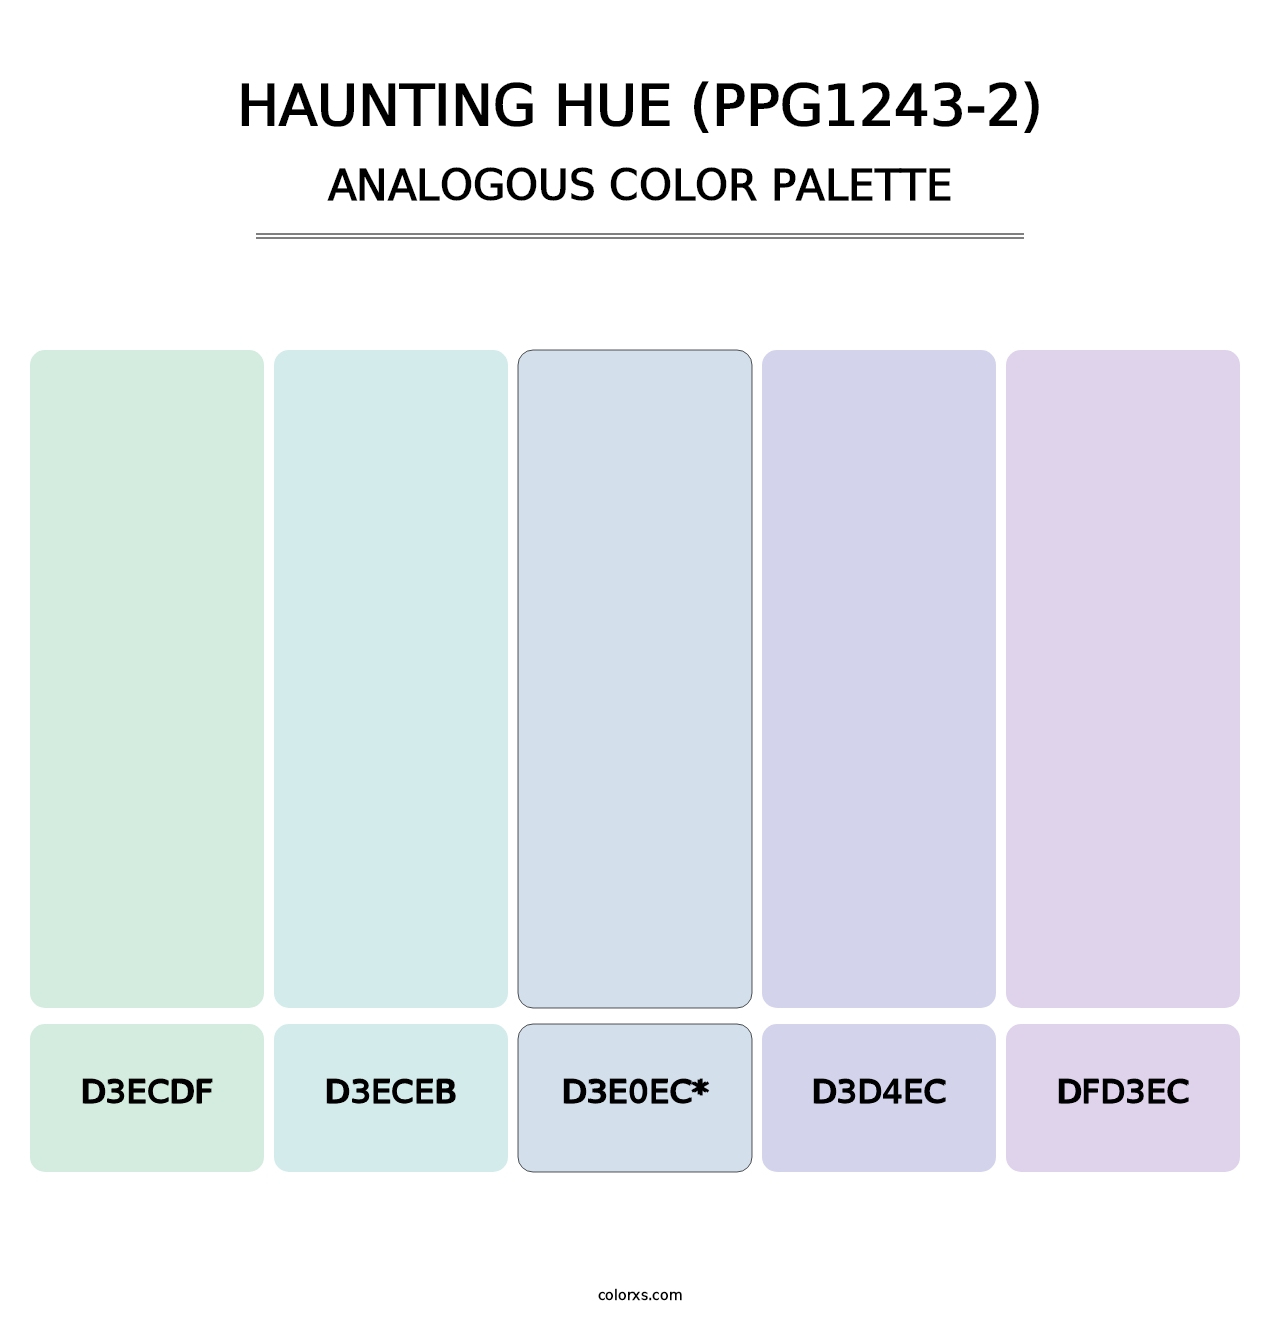 Haunting Hue (PPG1243-2) - Analogous Color Palette